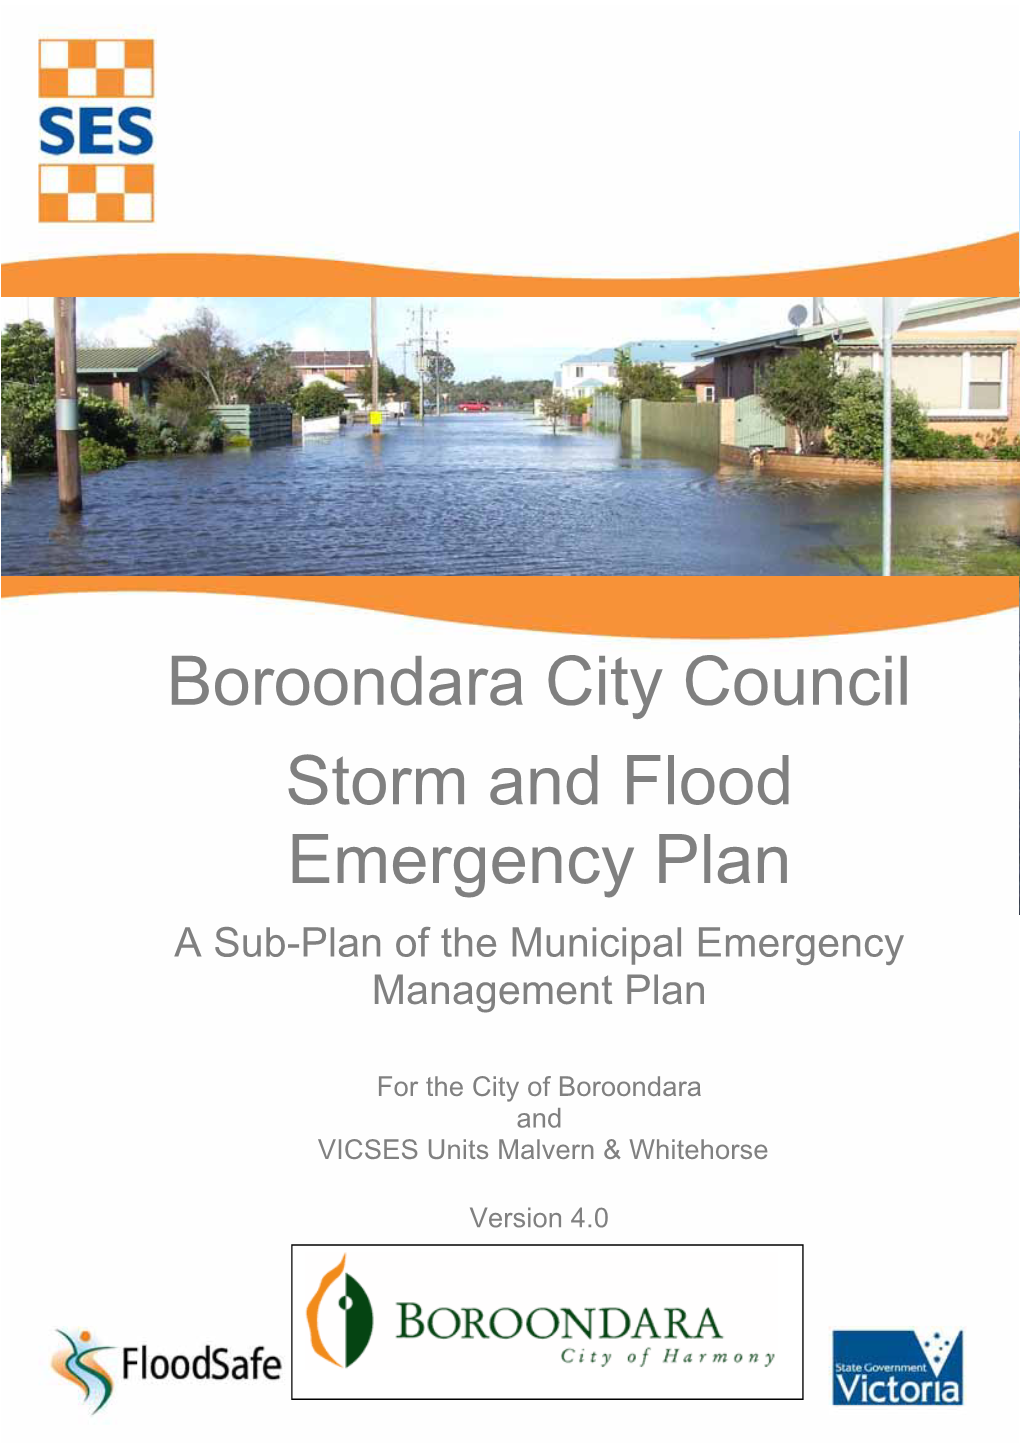 Boroondara City Council Storm and Flood Emergency Plan a Sub-Plan of the Municipal Emergency Management Plan